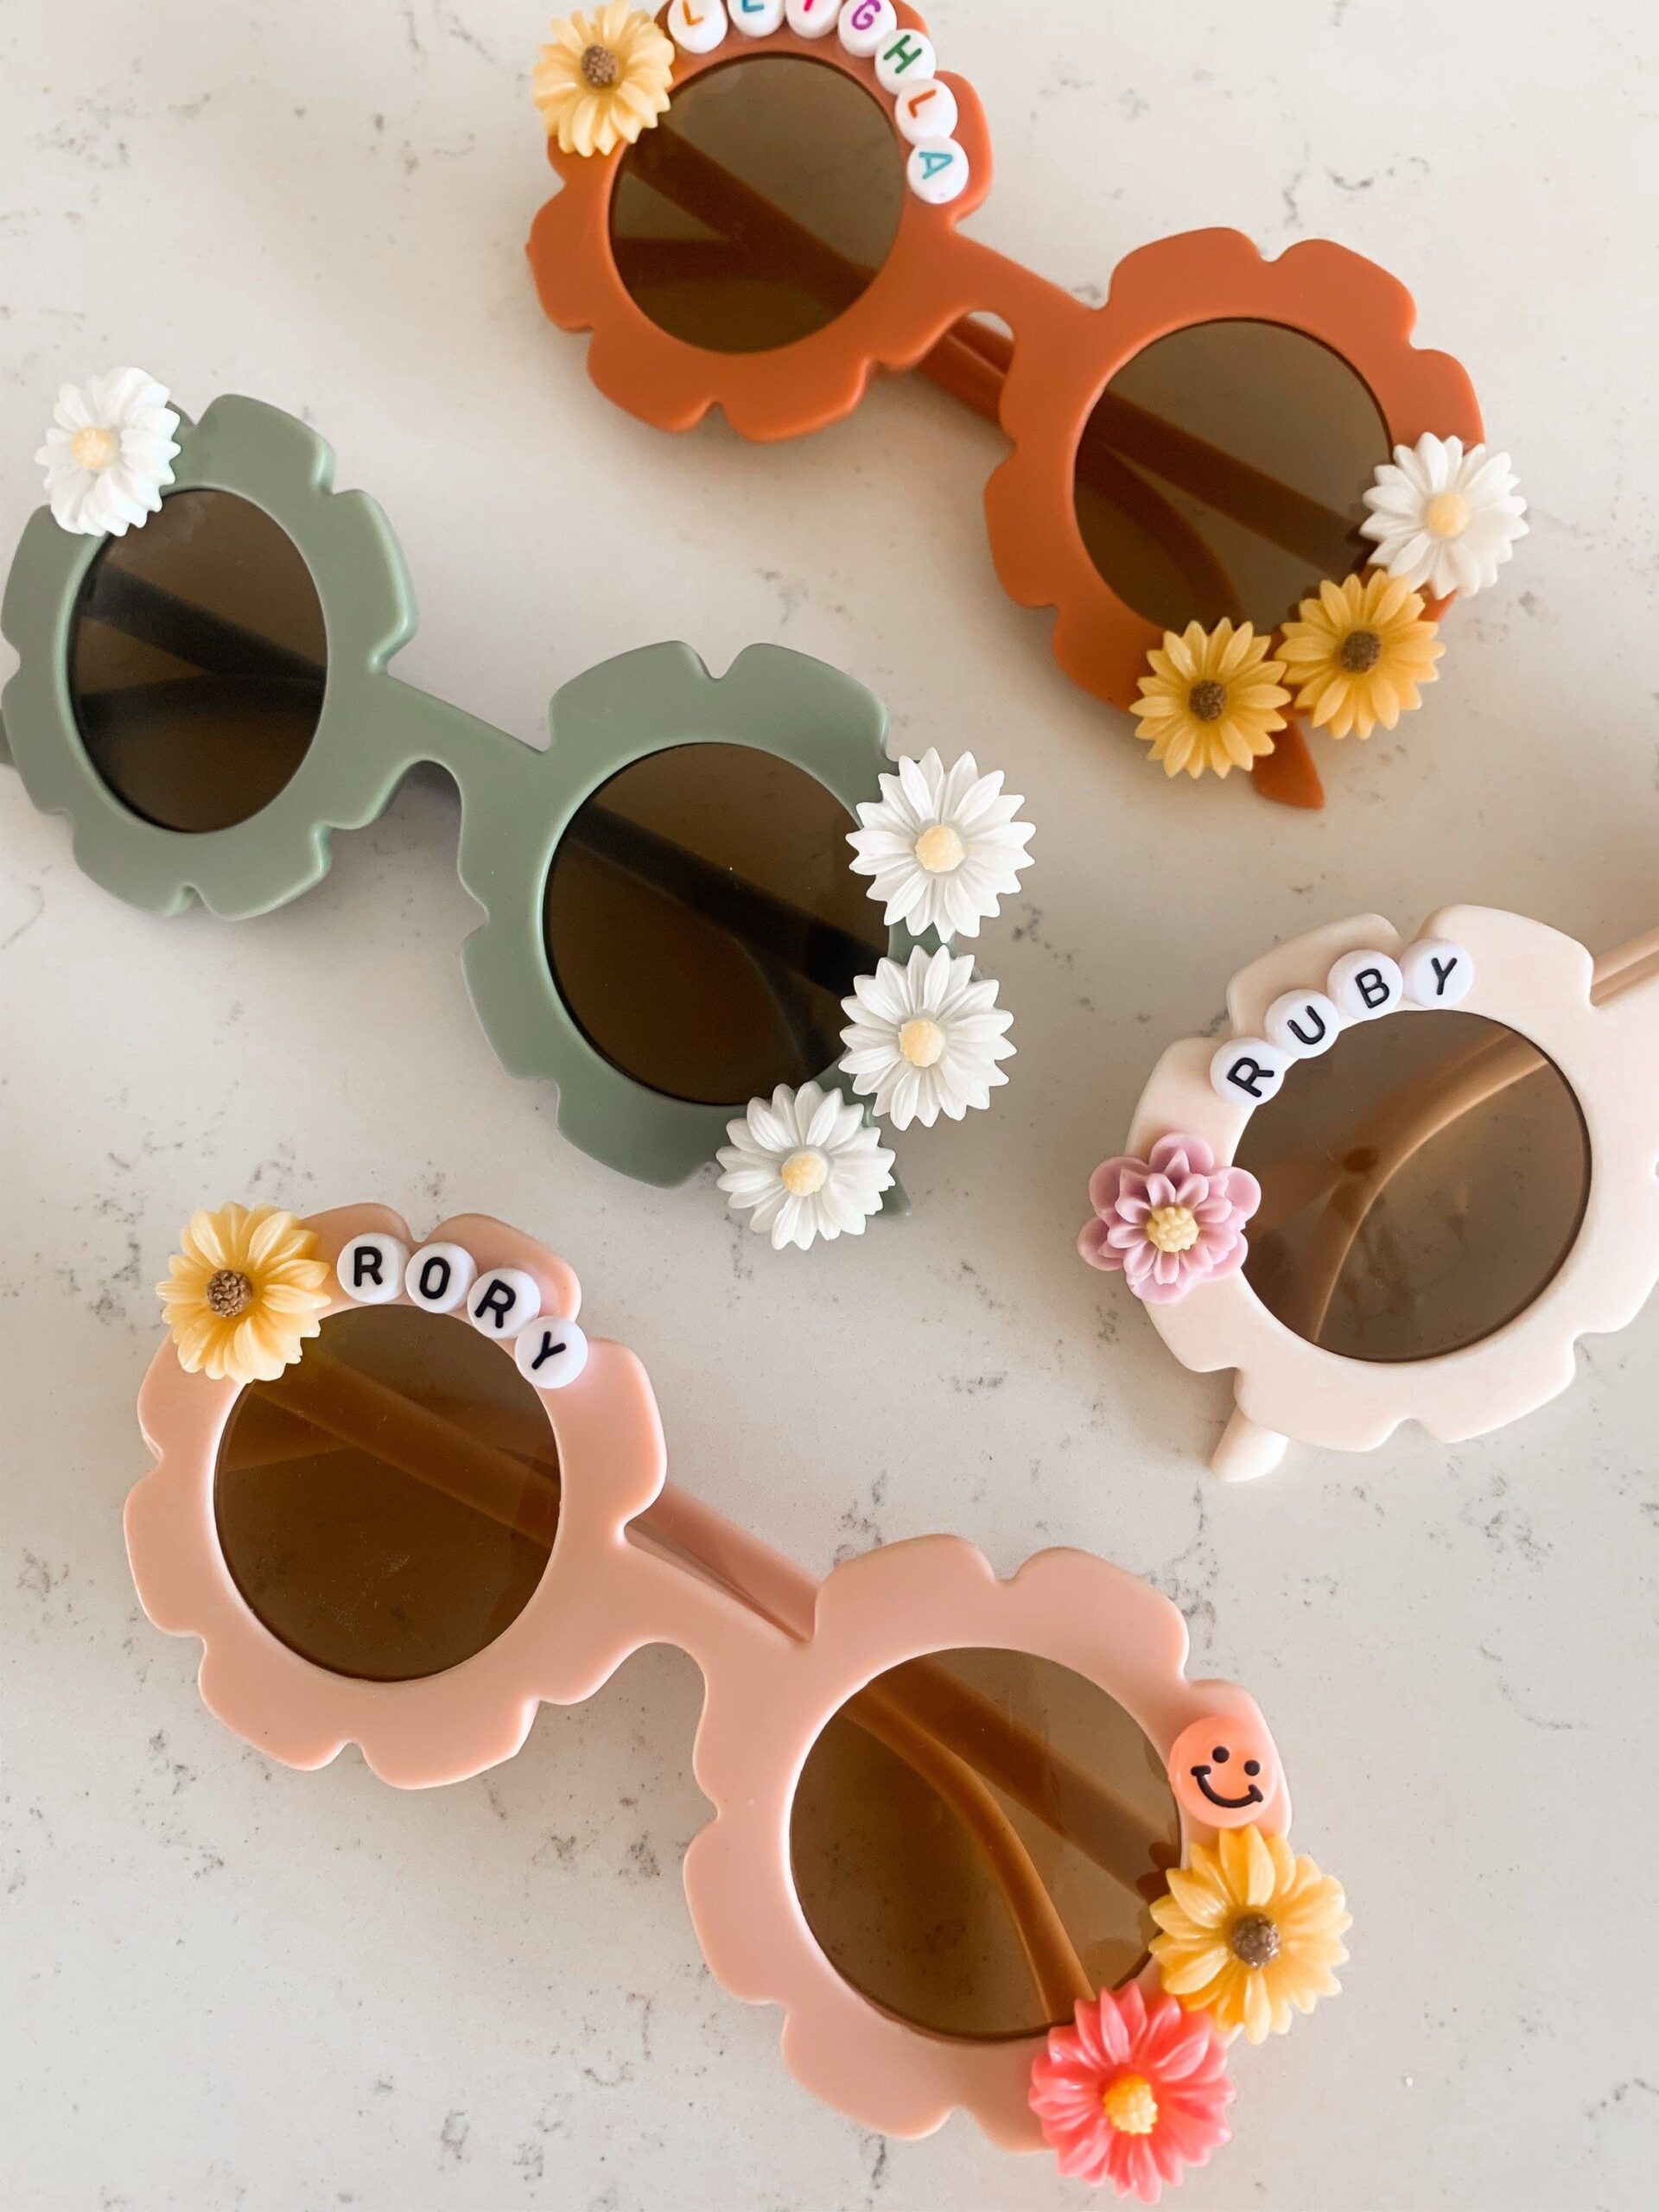 Brighten Up Your Look With Floral Sunglasses This Summer